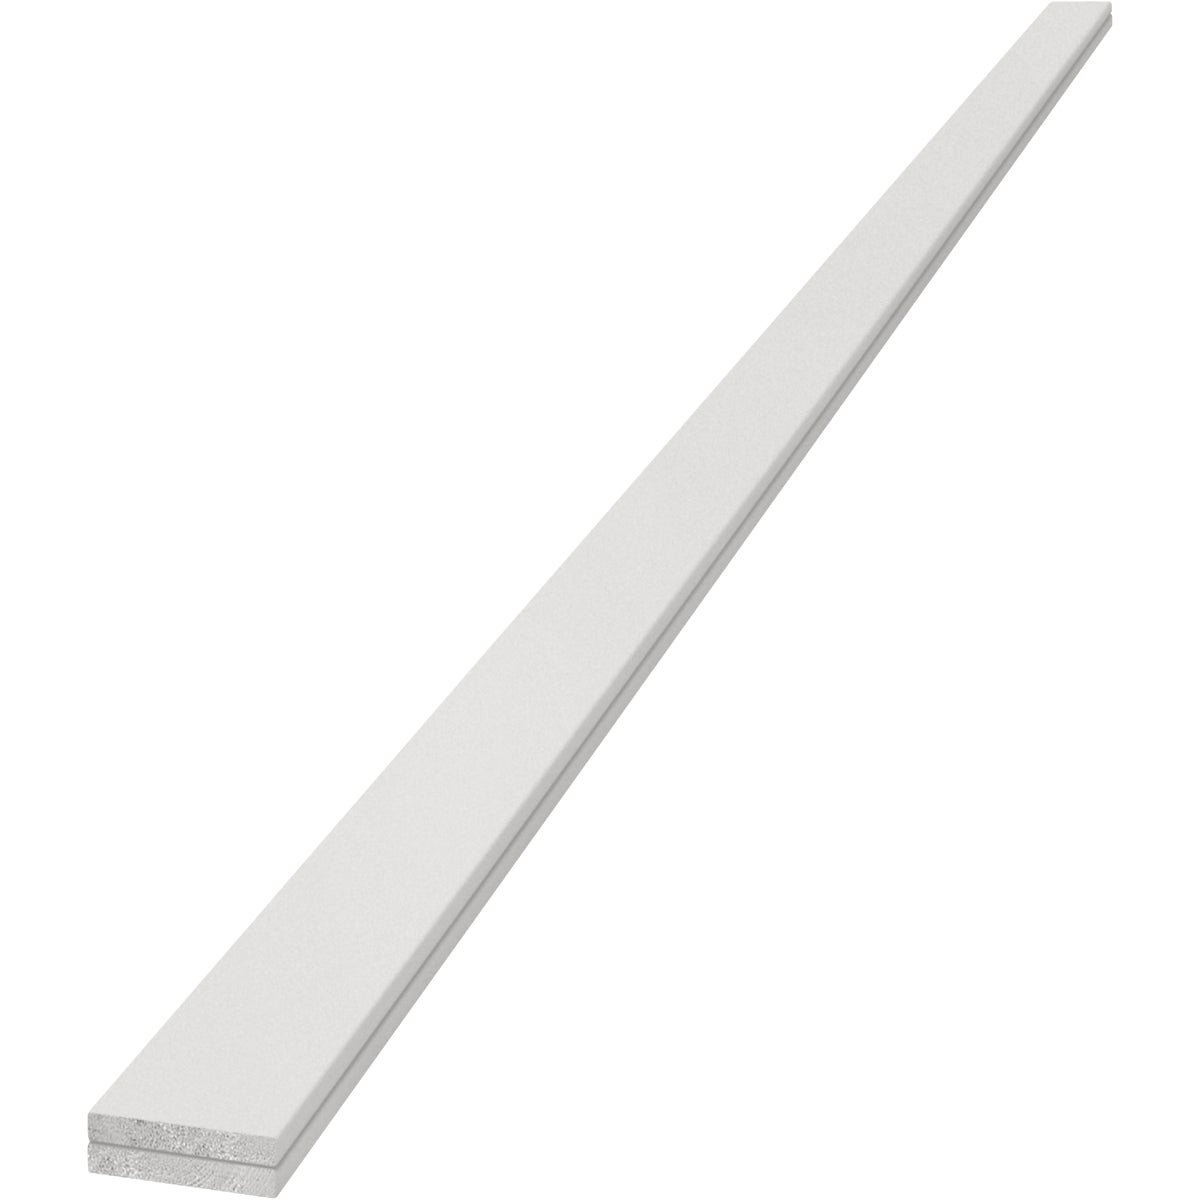 UFP Edge Timeless Nickel Gap 4 In. W x 8 Ft. L x 1 In. Thick White Finger-Jointed Pine Trim Board (2-Pack)